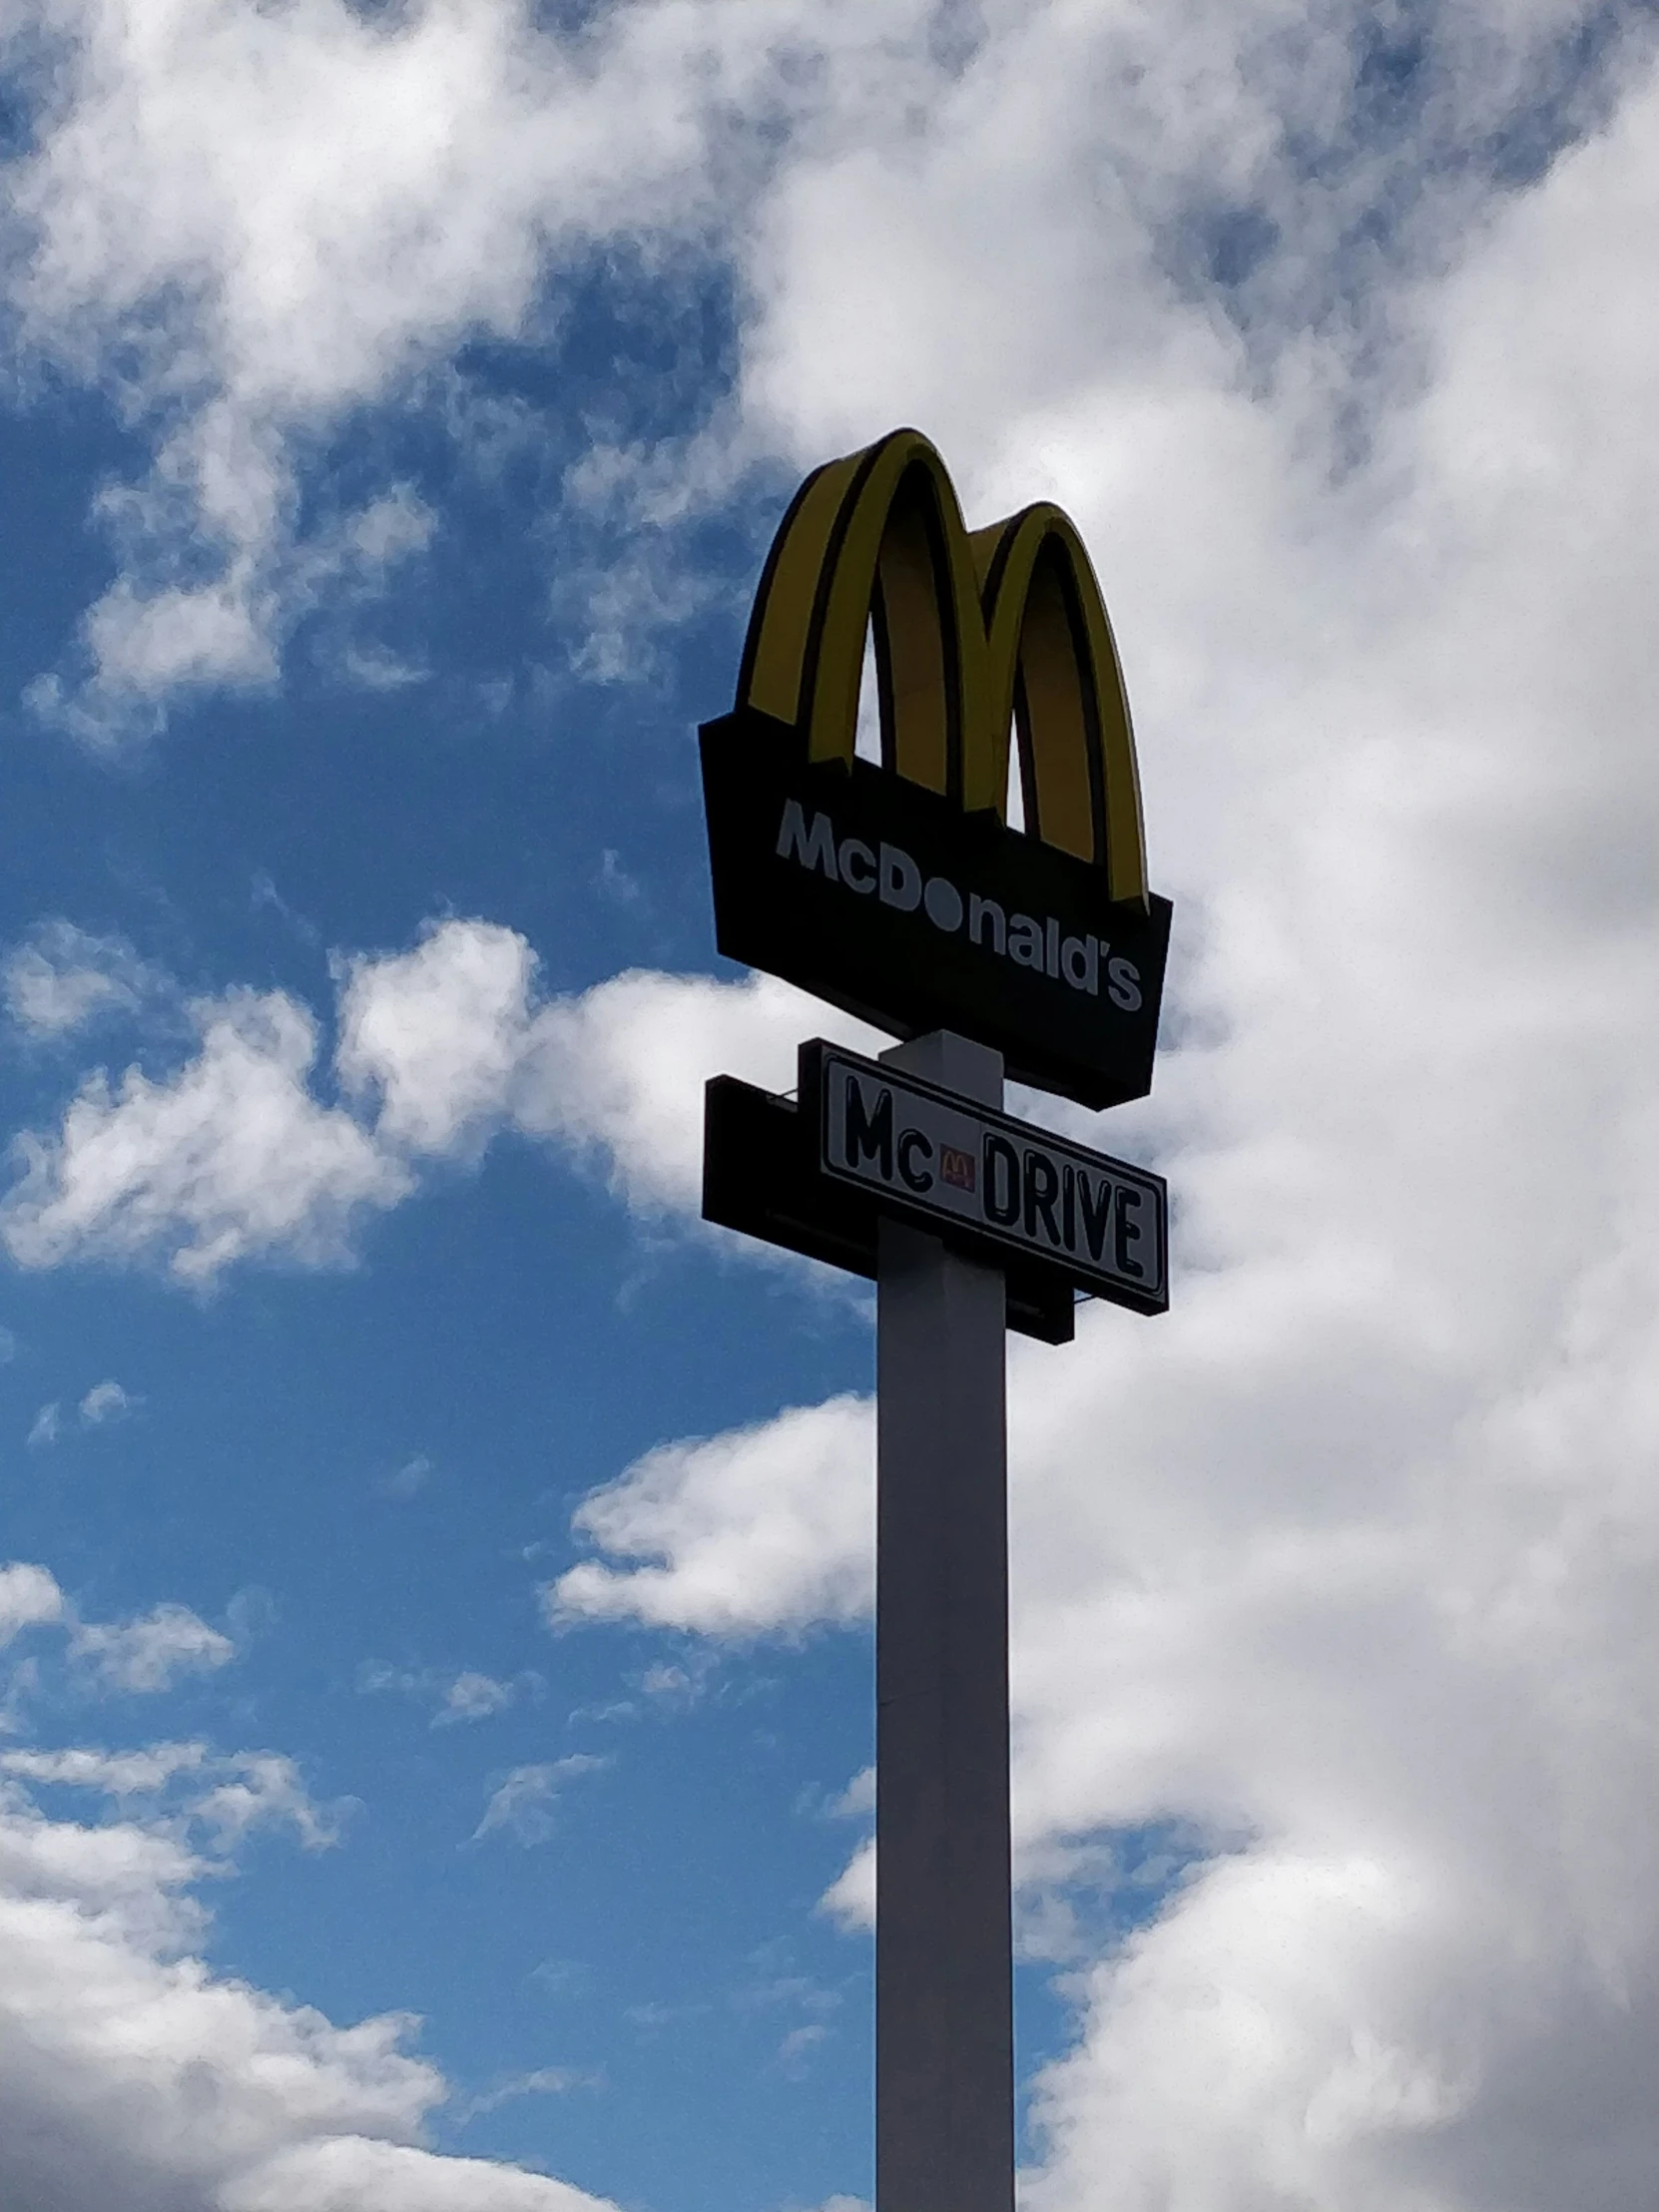 a mcdonalds sign in front of a cloudy blue sky